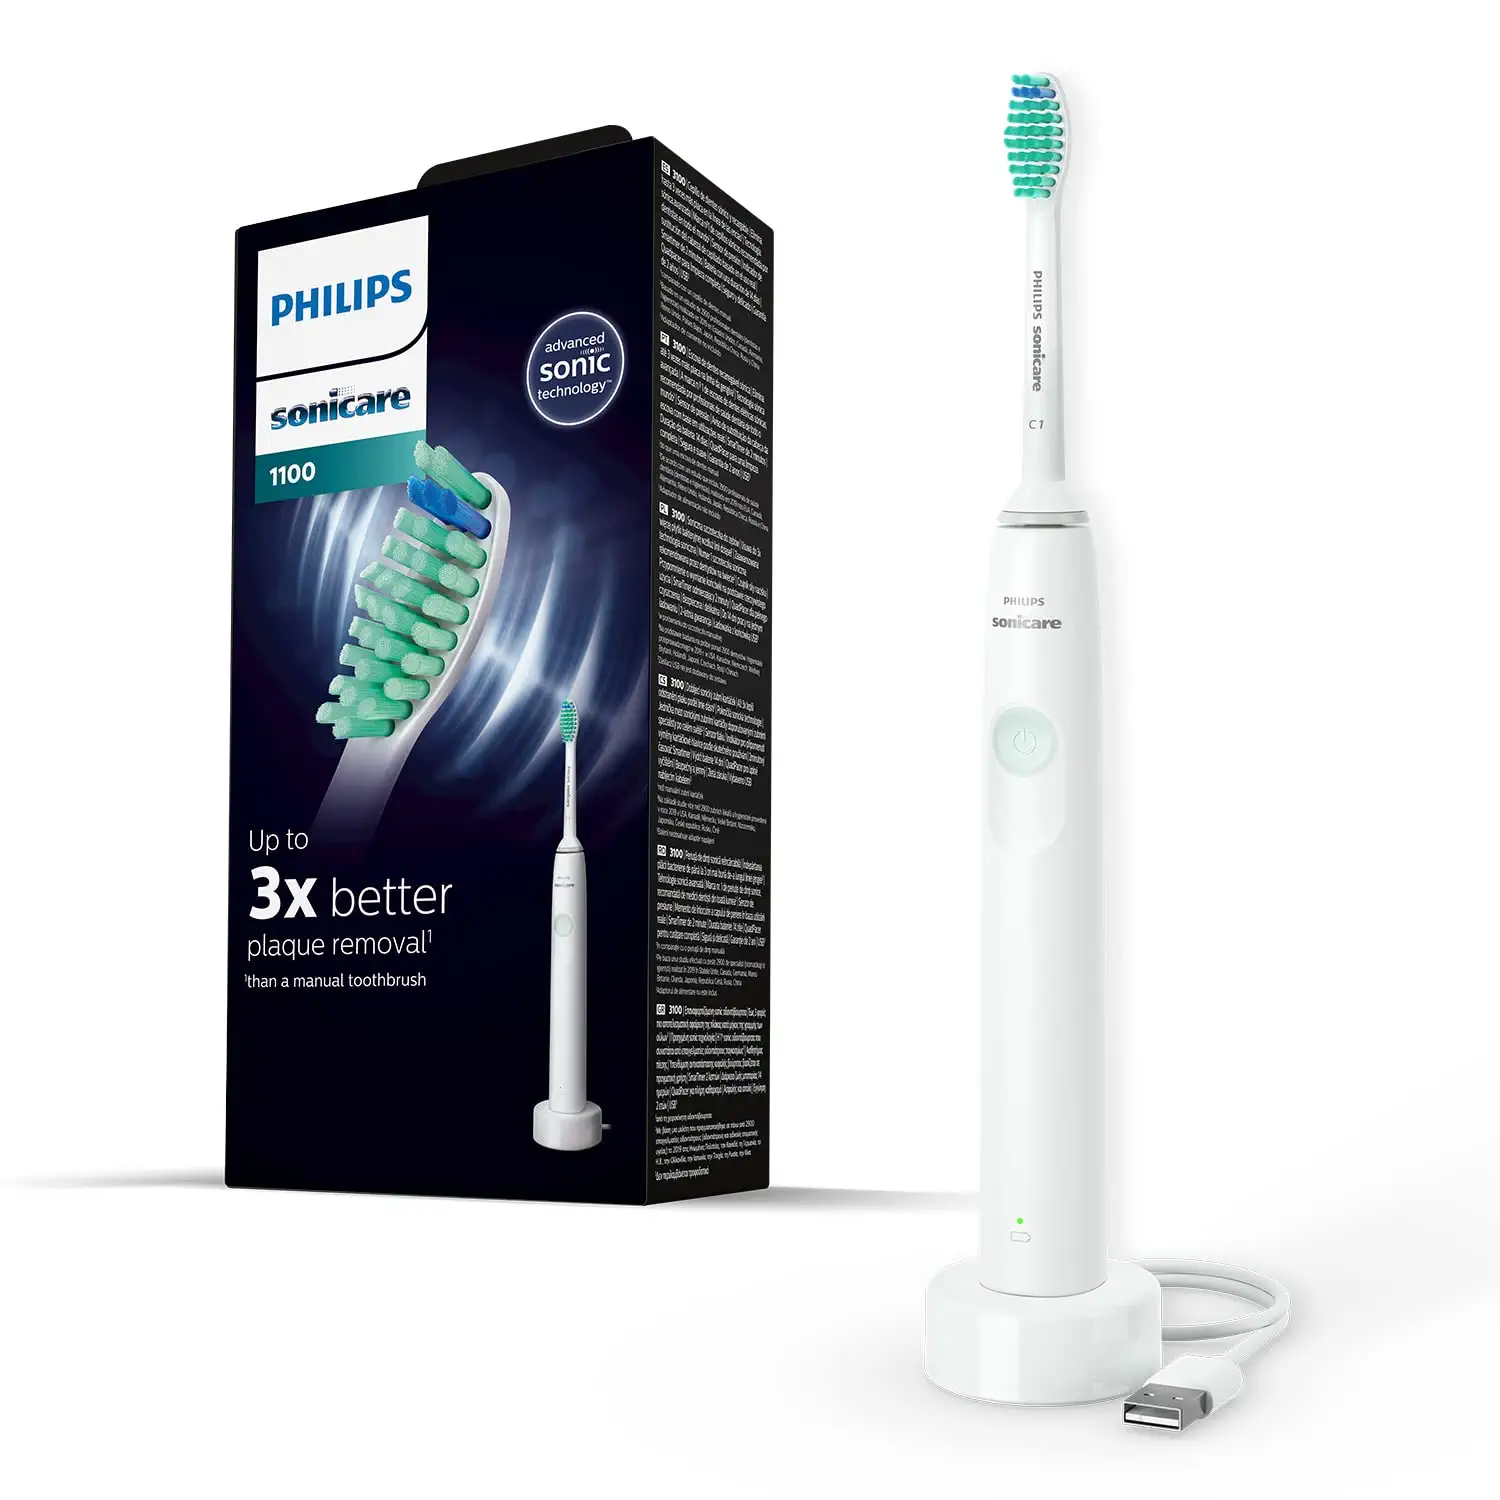 Sonicare Tec Series with Electric Sonic HX3641 Toothbrush 1100 Philips